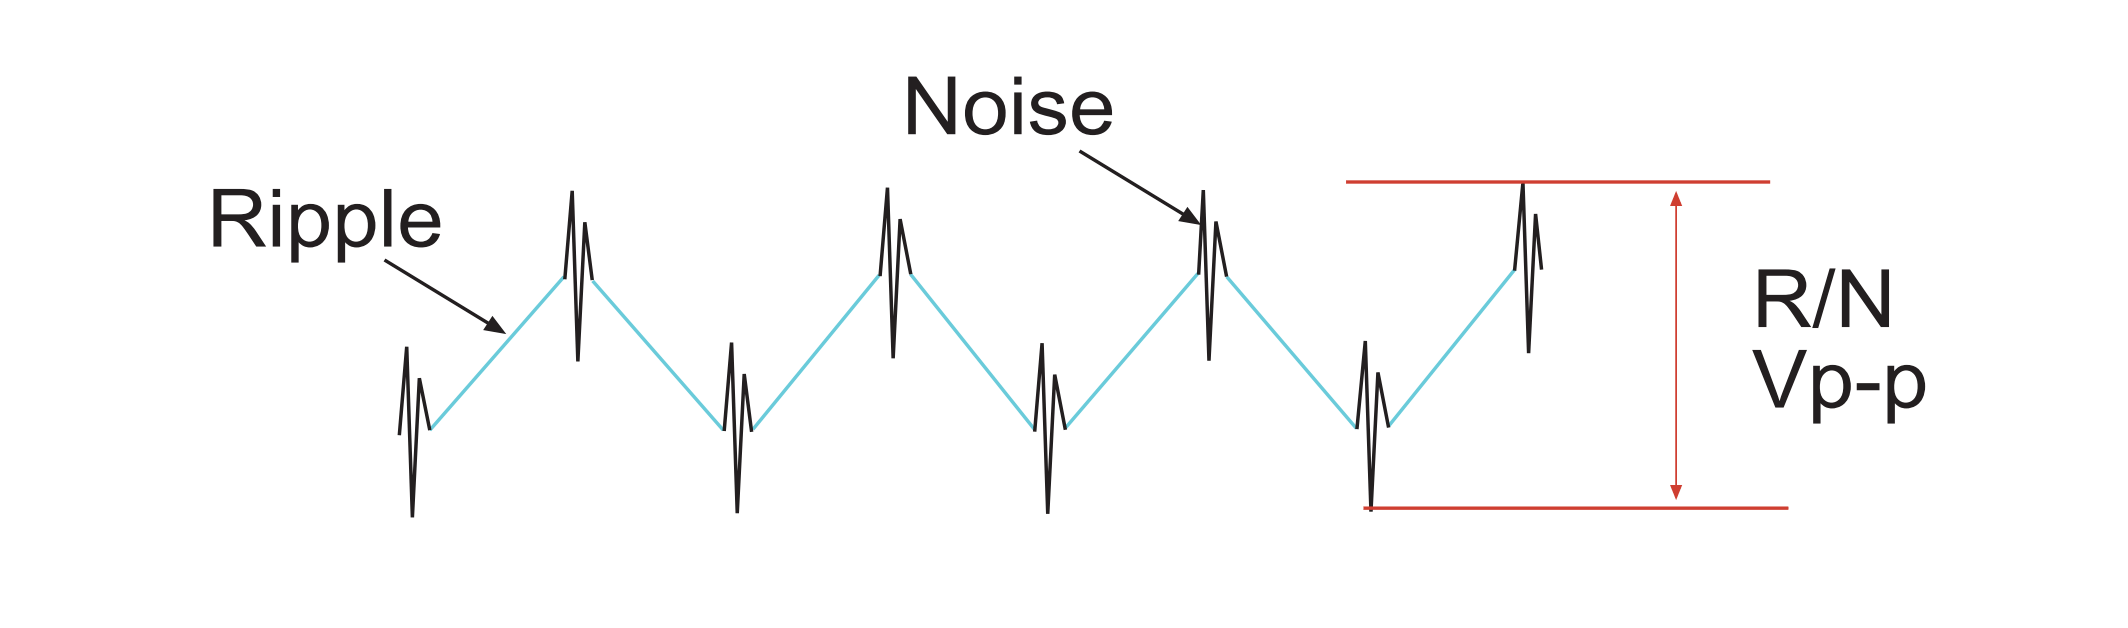 Ripple and Noise